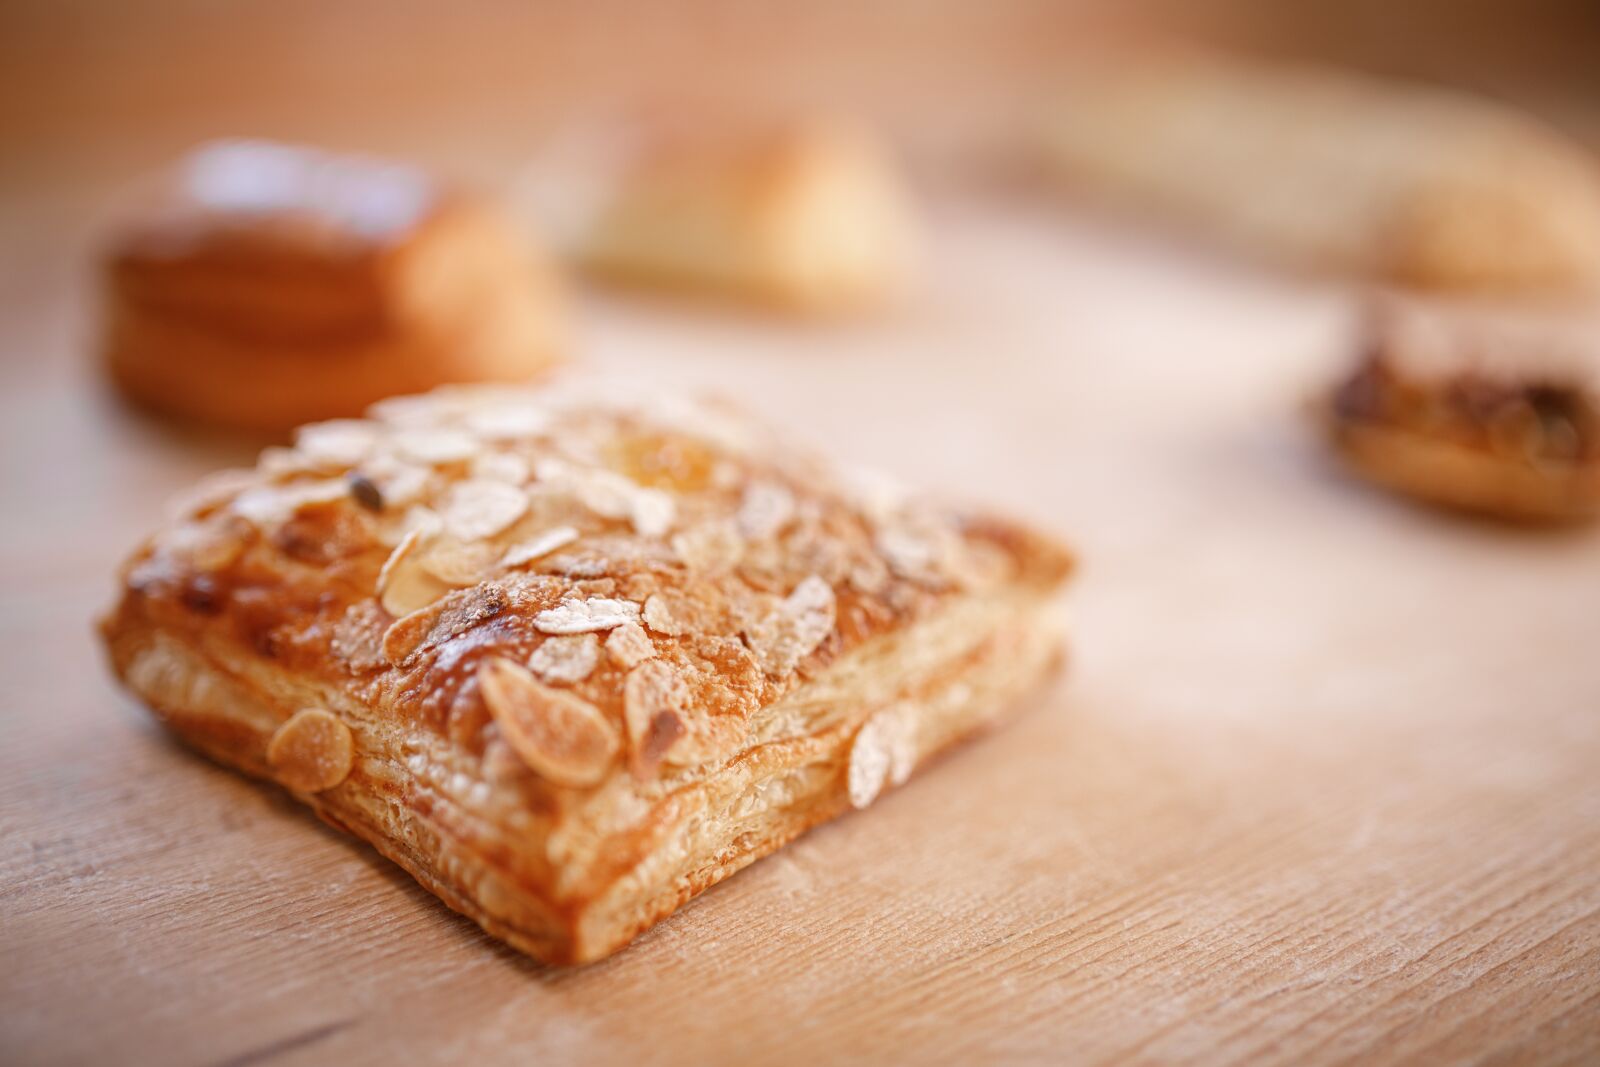 Sigma 35mm F1.4 DG HSM Art sample photo. Bakery, particles, hunger photography